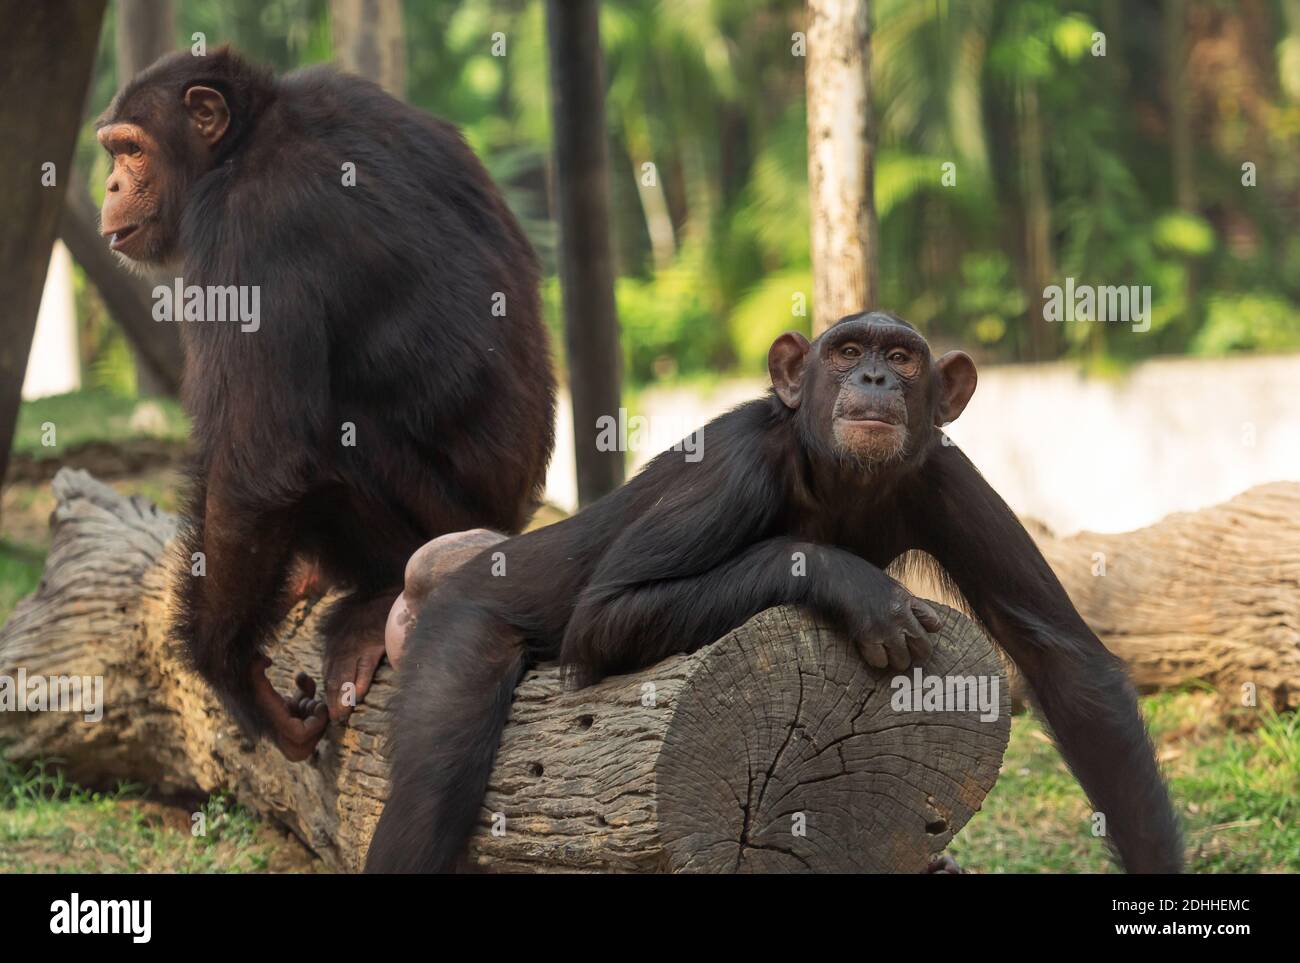 Chimpanzee resting on a wooden log while another chimp standing in the background at Indian wildlife sanctuary Stock Photo